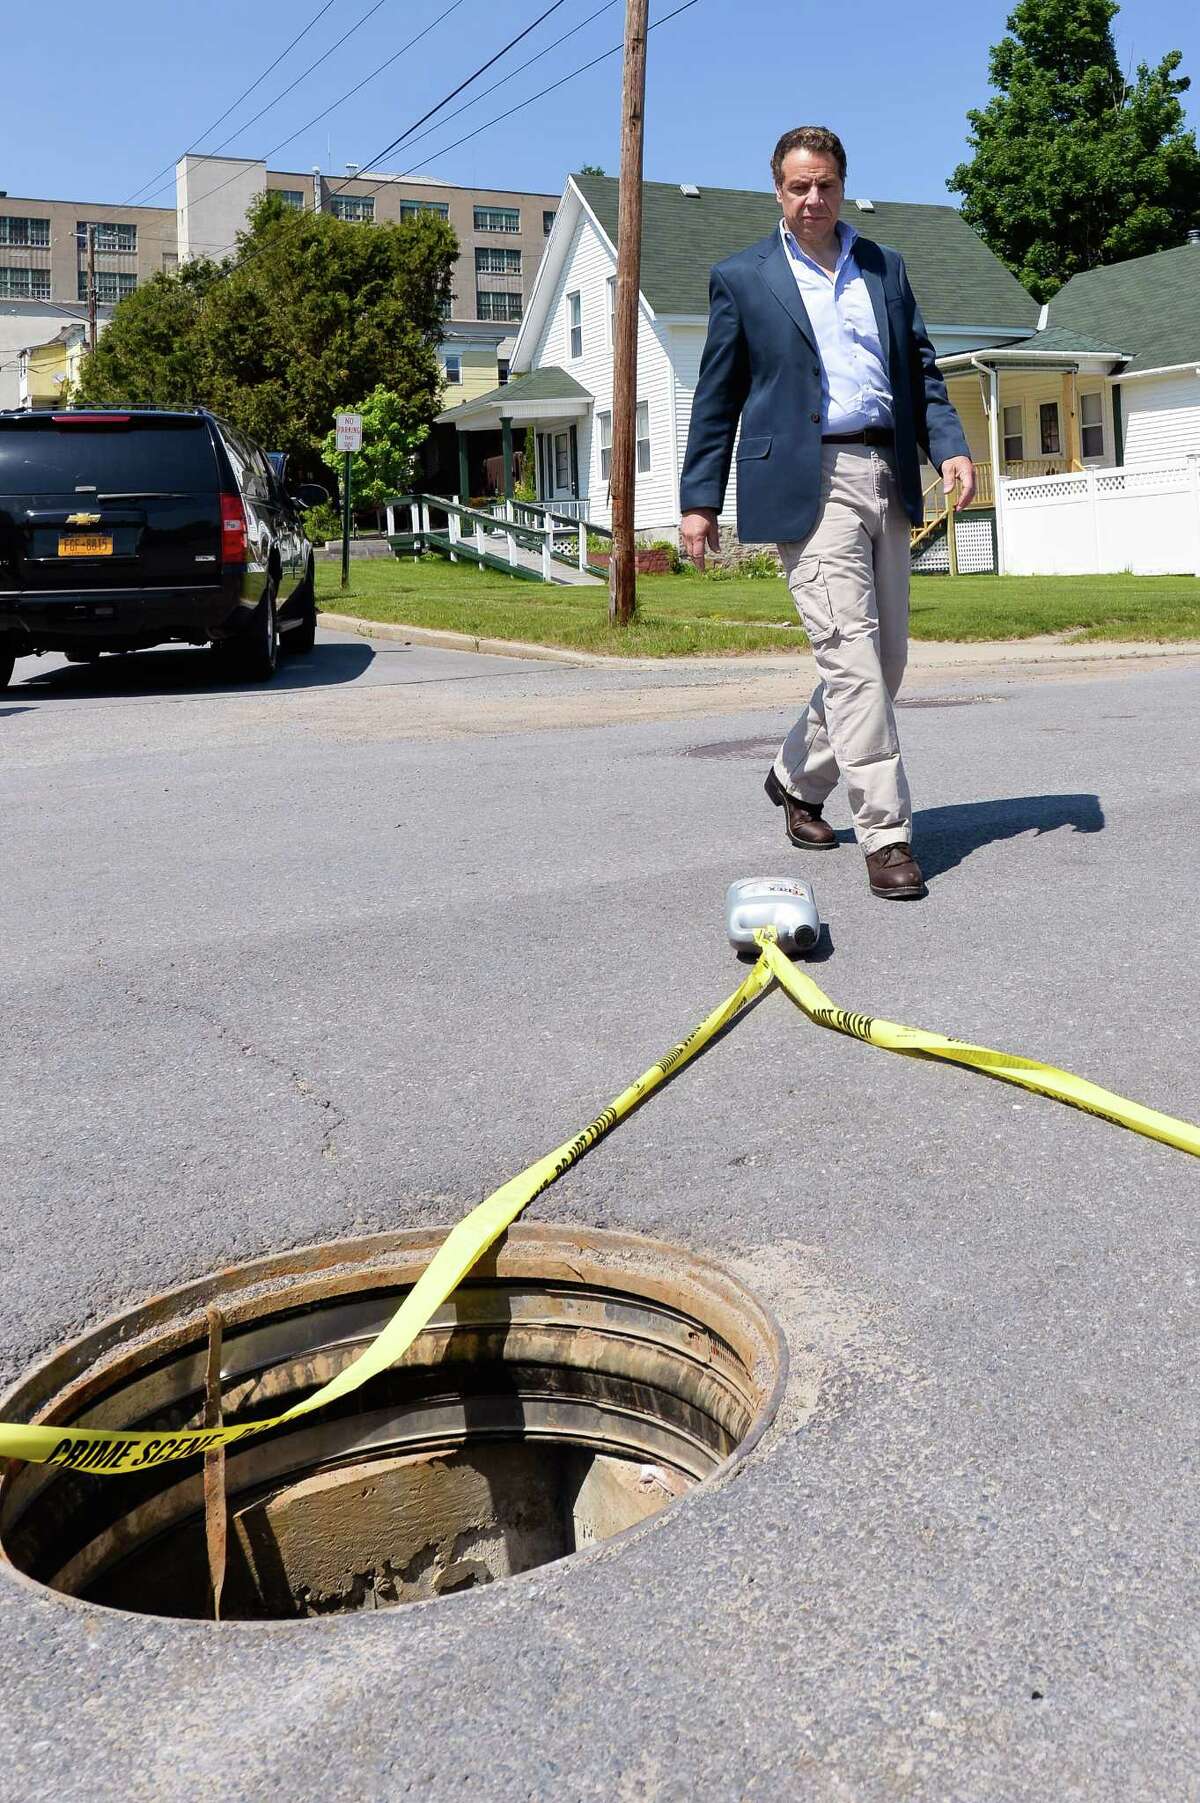 Gov. Andrew Cuomo is shown the manhole where two convicted murderers escaped from the Clinton Correctional Facility June 6, 2015.  (Photo by Darren McGee/New York State Governor's Office via Getty Images)